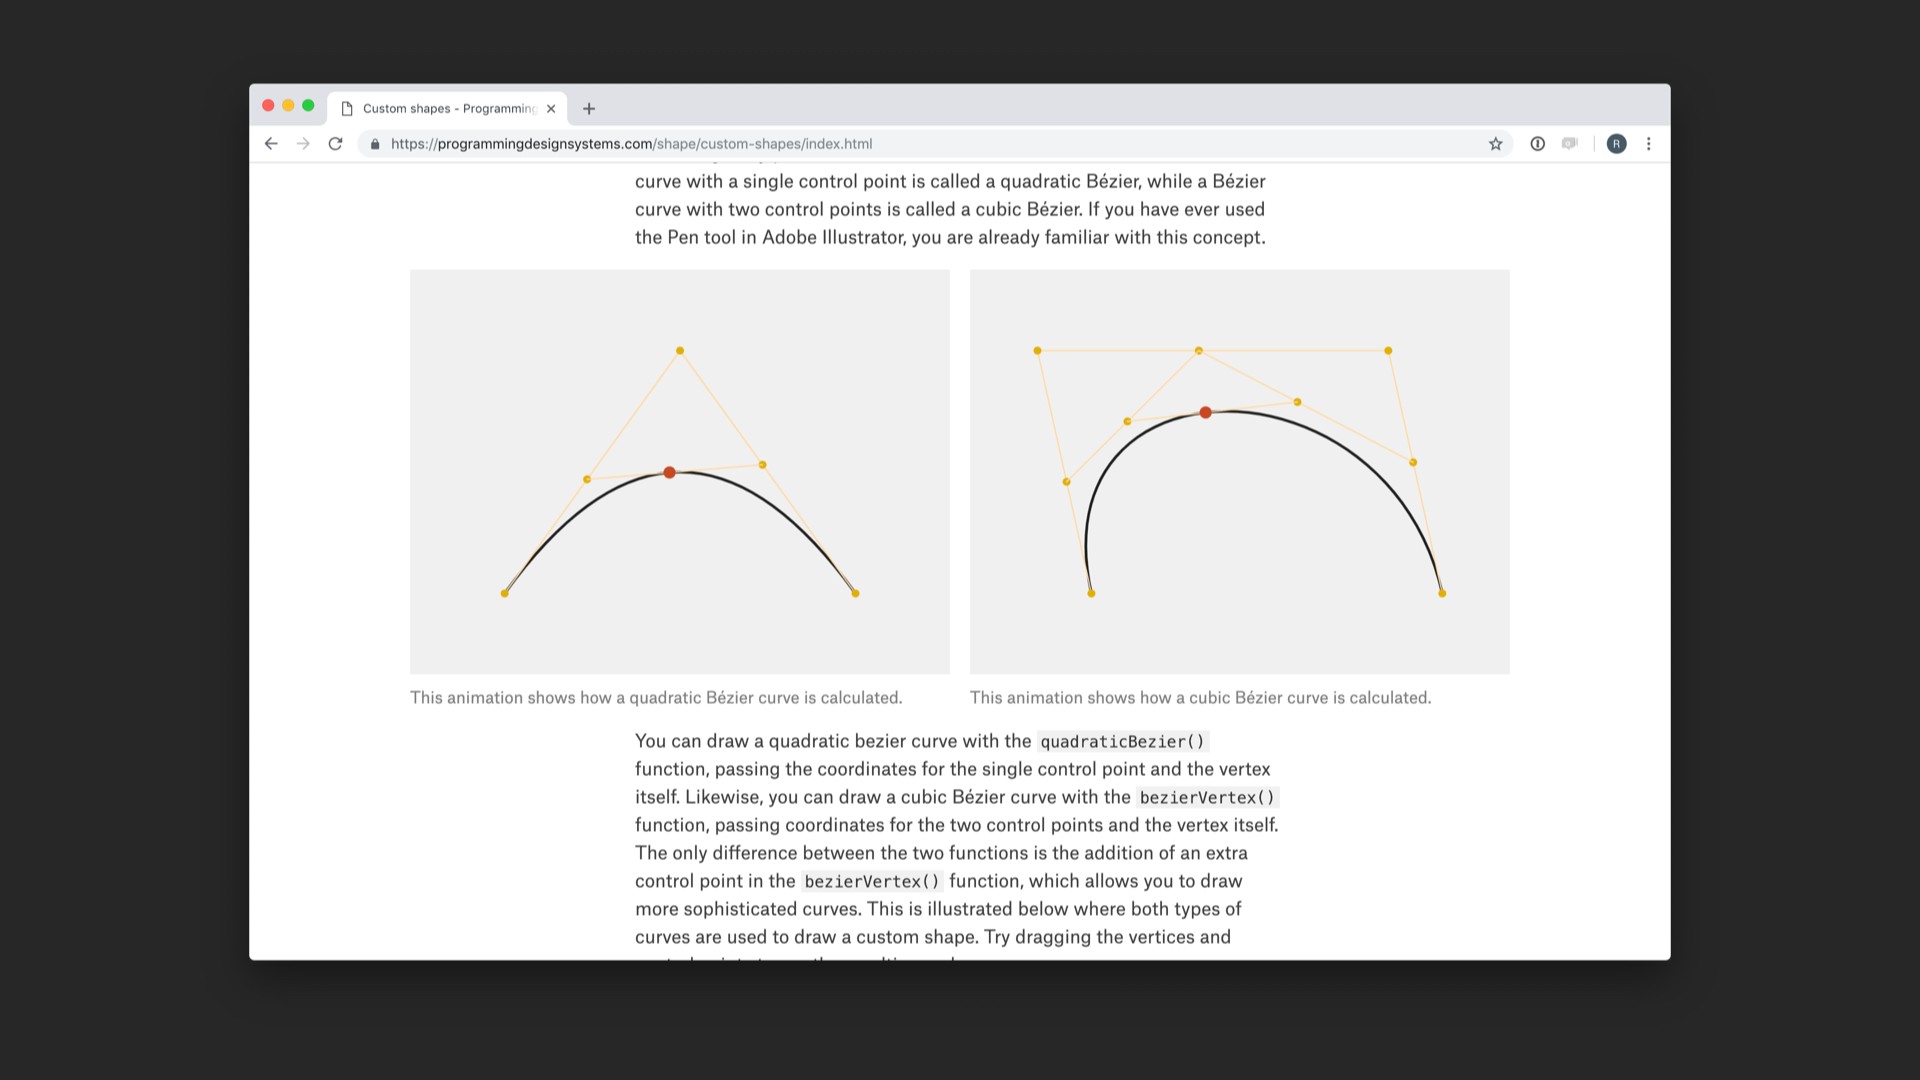 Screenshot of interactive Bezier curve example in referenced website.